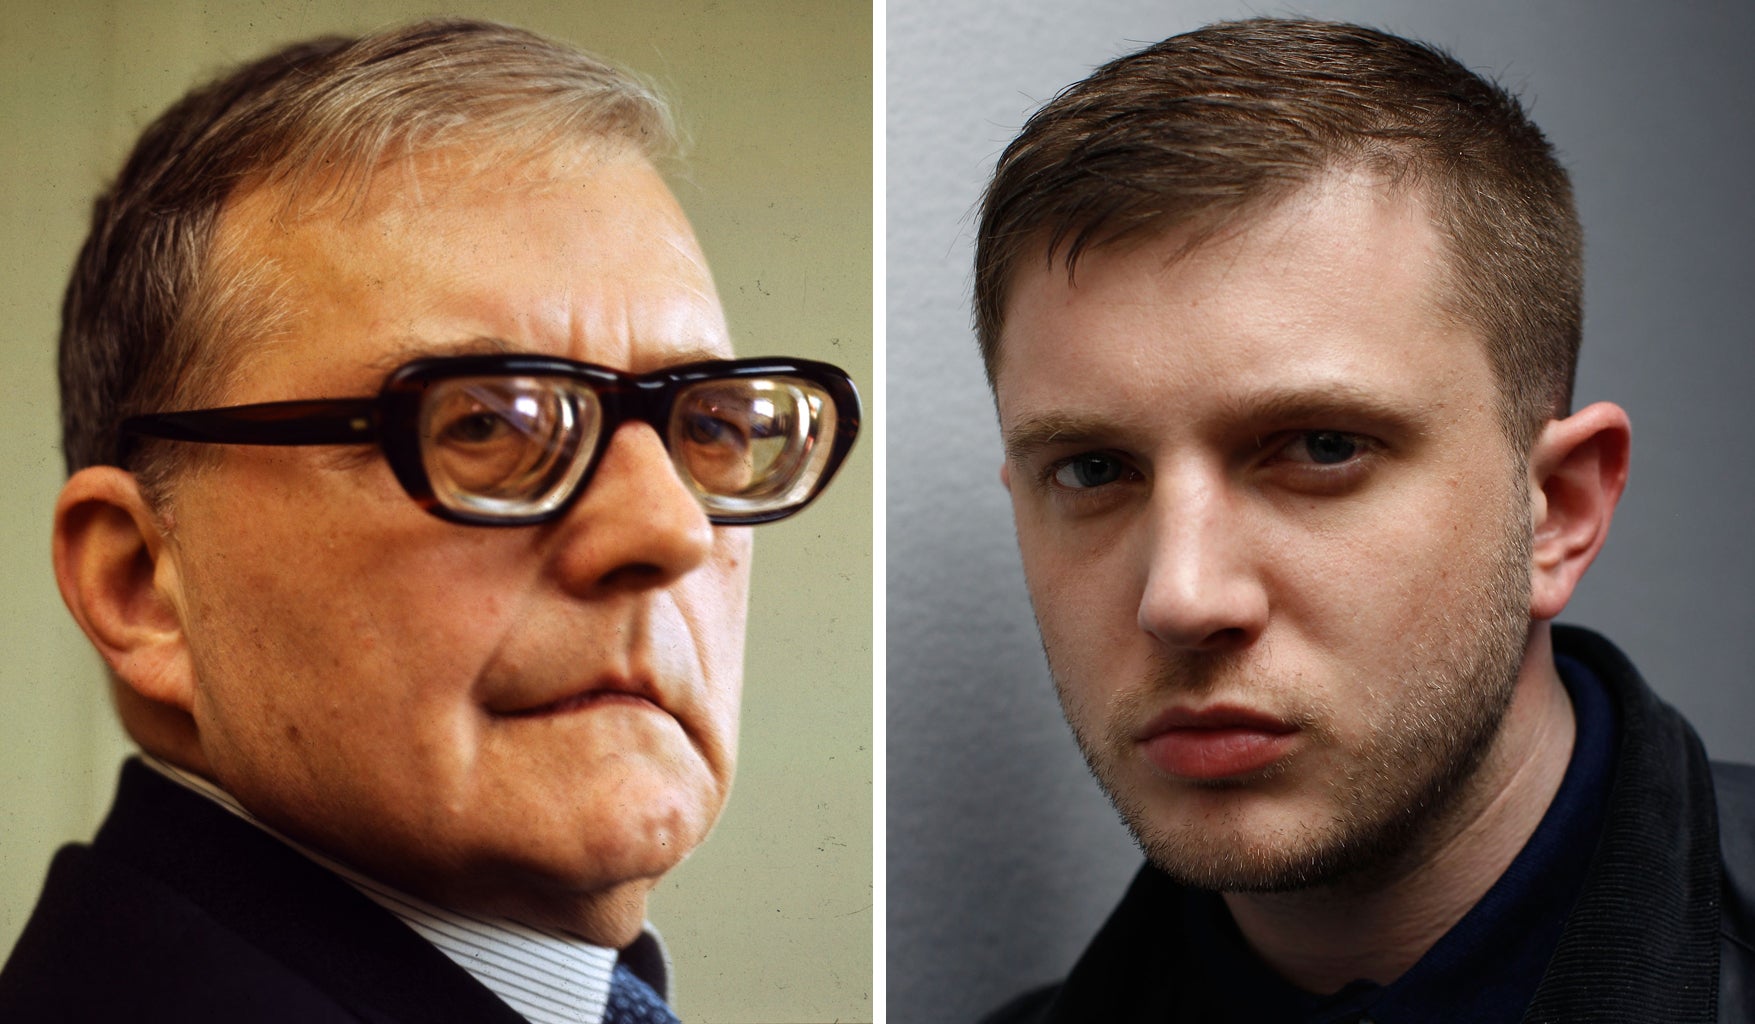 Dmitri Shostakovich has been nominated for an Ivor Novello award after his work was sampled on Plan B's Ill Manors